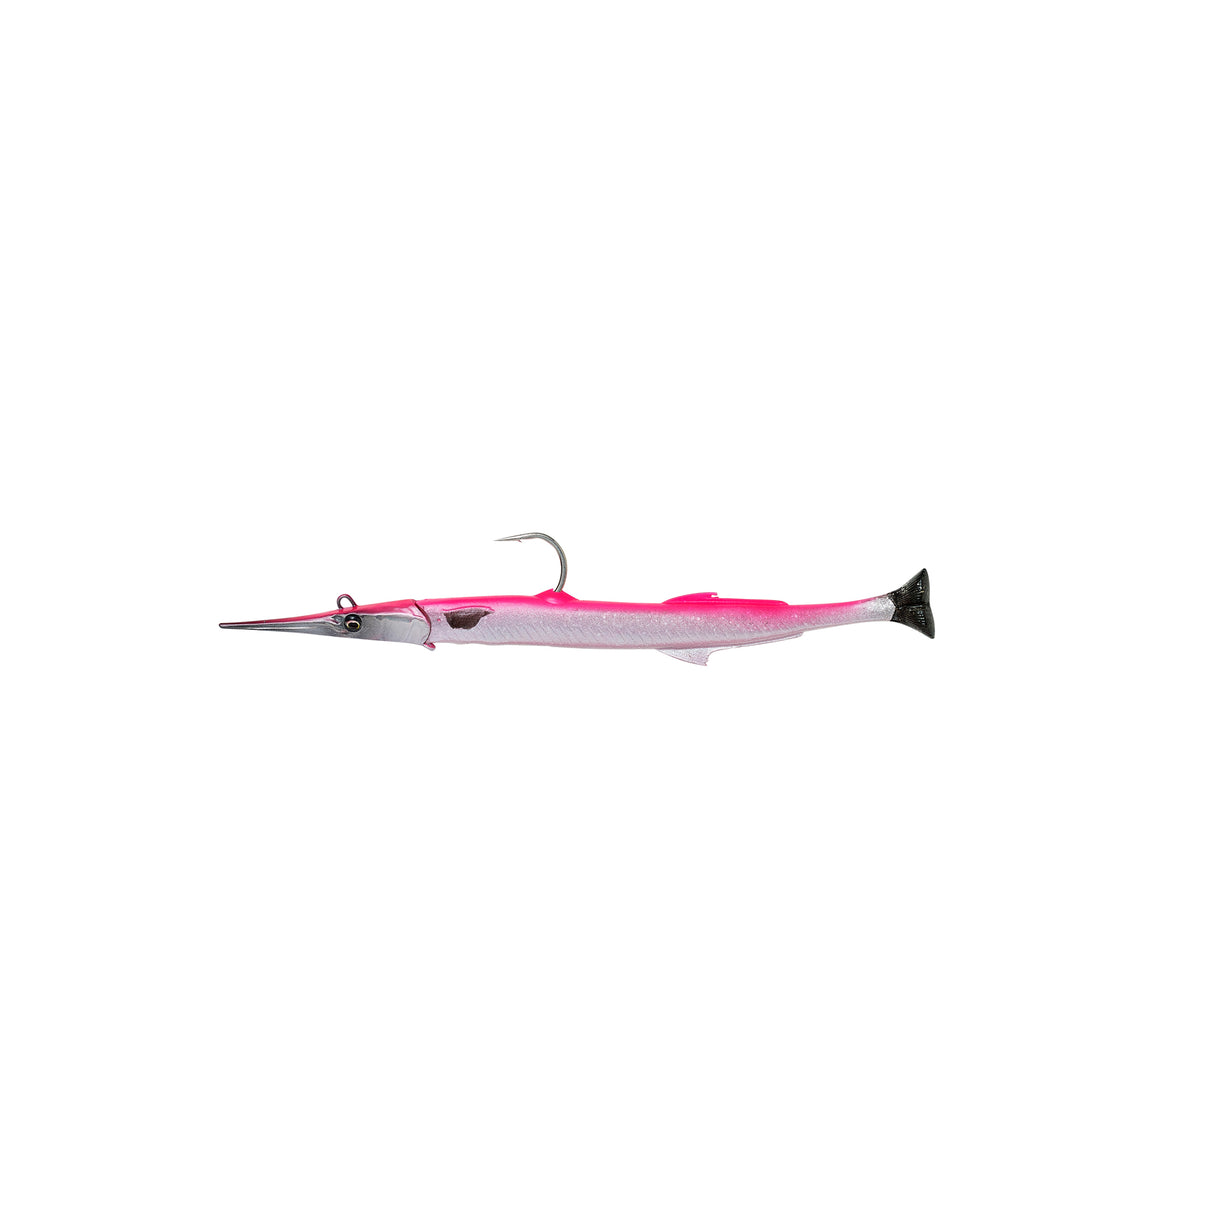 Savage Gear Pulse Tail Needle Fish (S) 9 Pink Silver / 2 oz